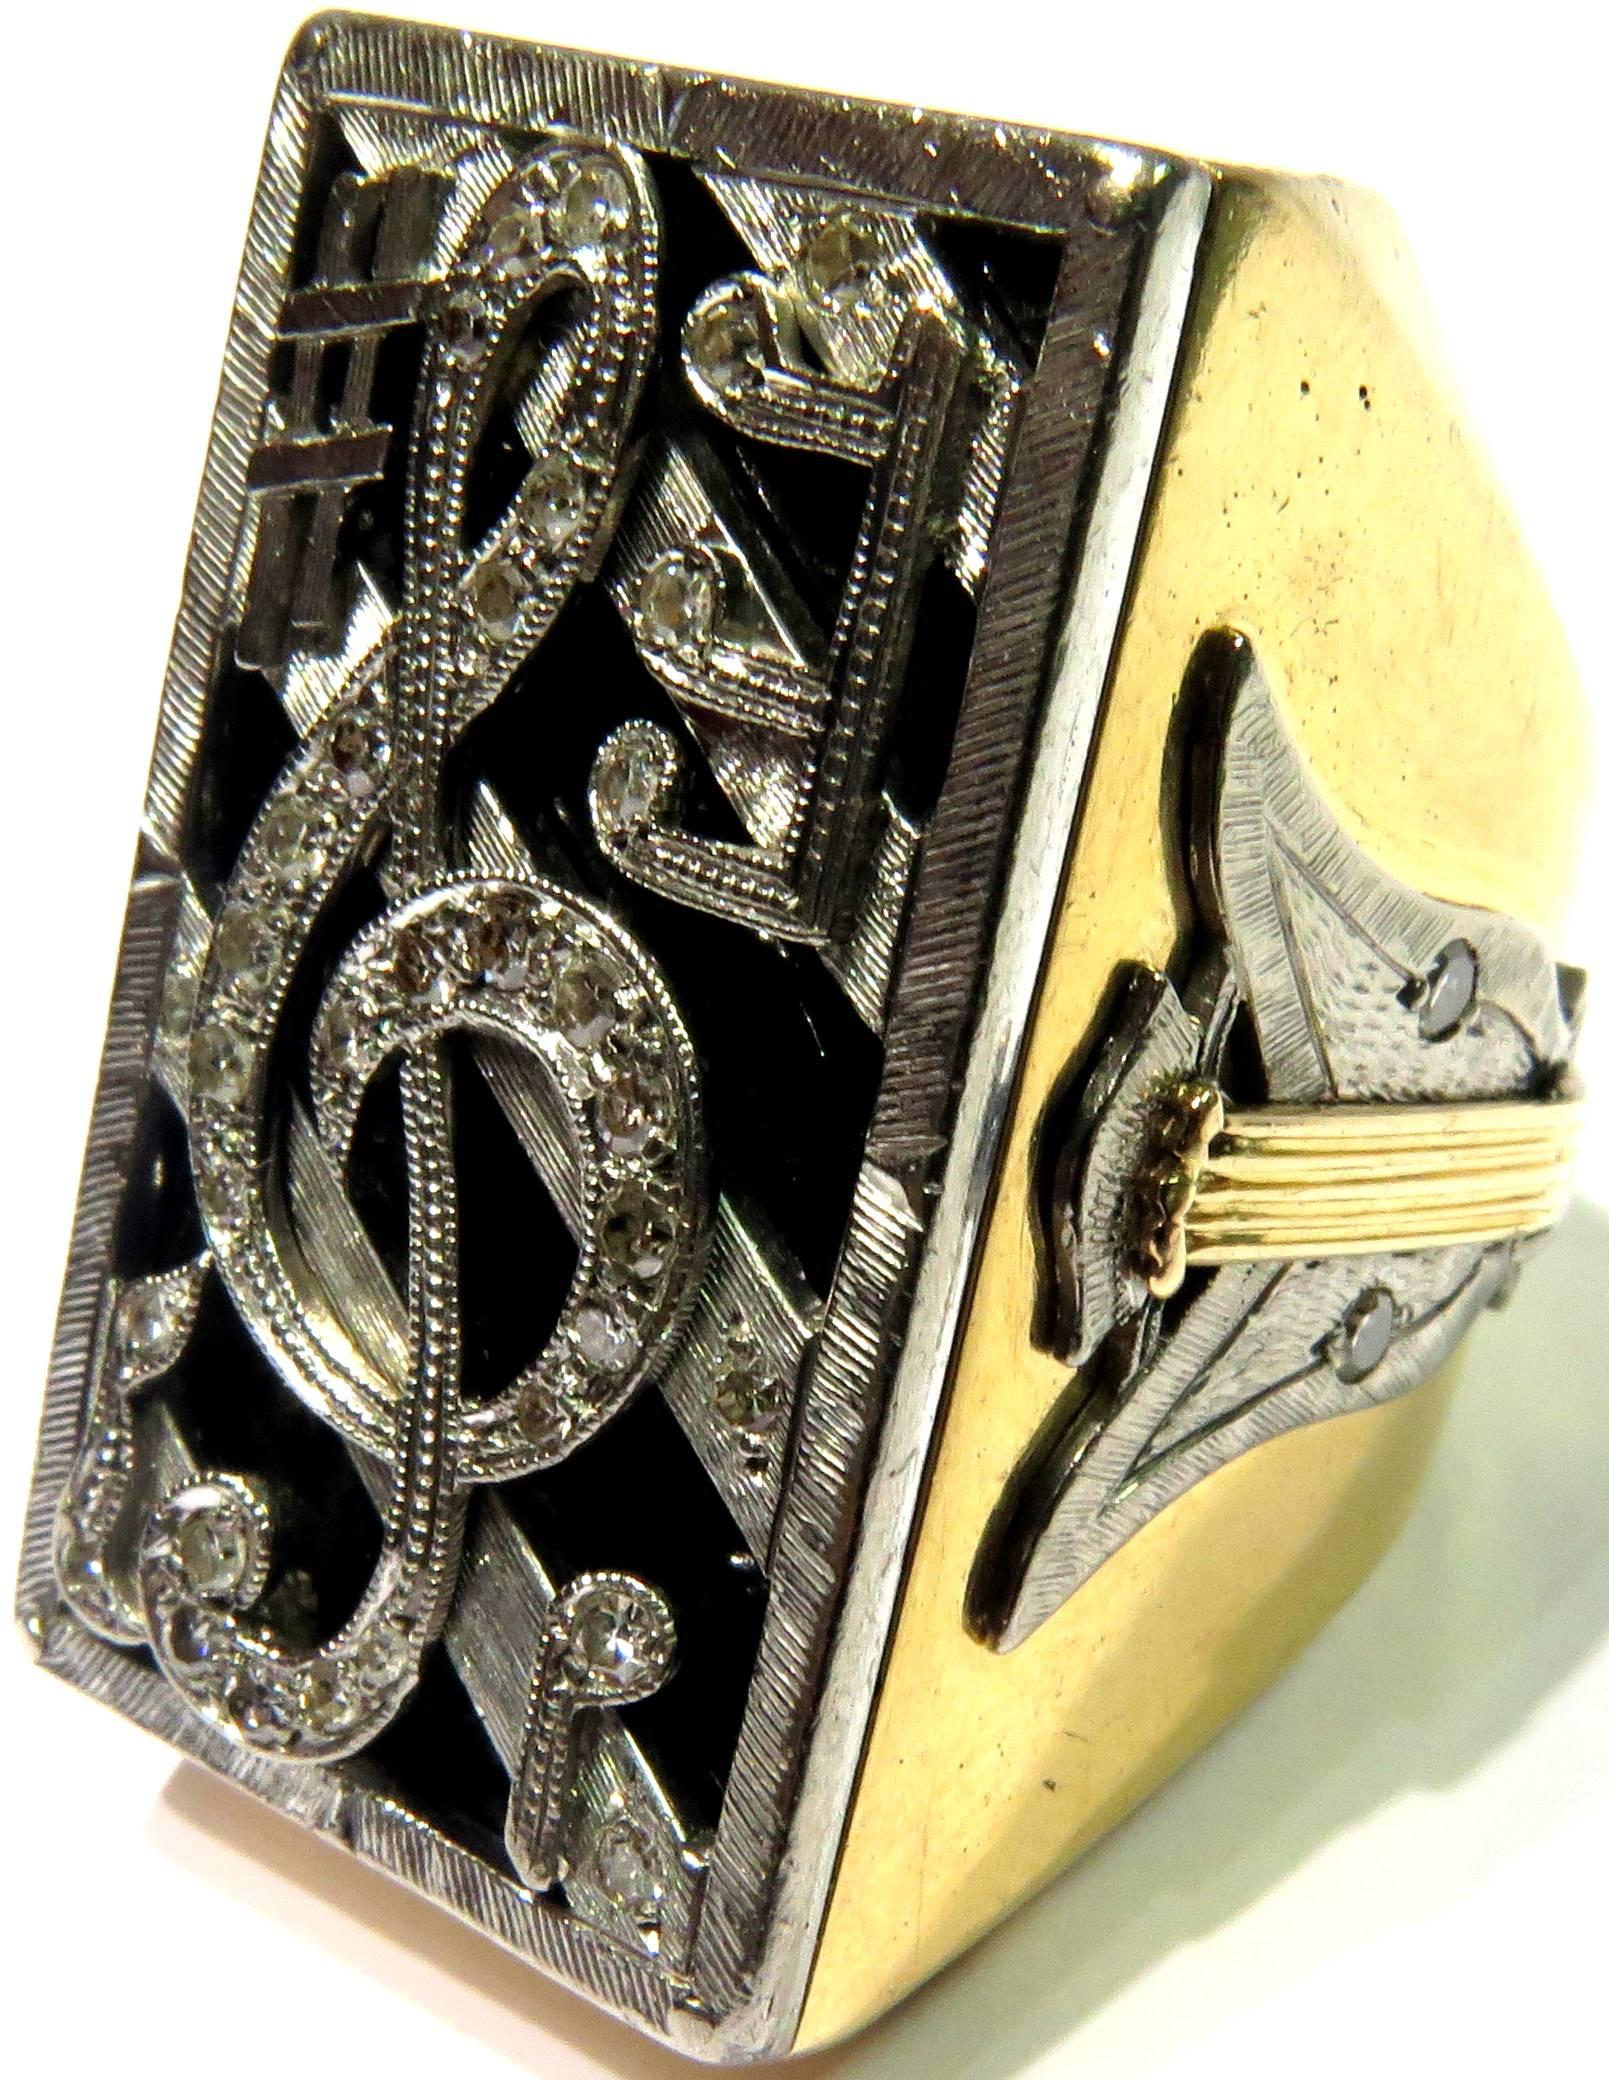 This incredibly large 18k white & yellow gold onyx diamond ring with musical symbles is completely unique. Engraved inside it says: 1o Prix Conservatiore De Musique De Paris 1952. When translated to English - 1st Prize Paris Conservatory of Music